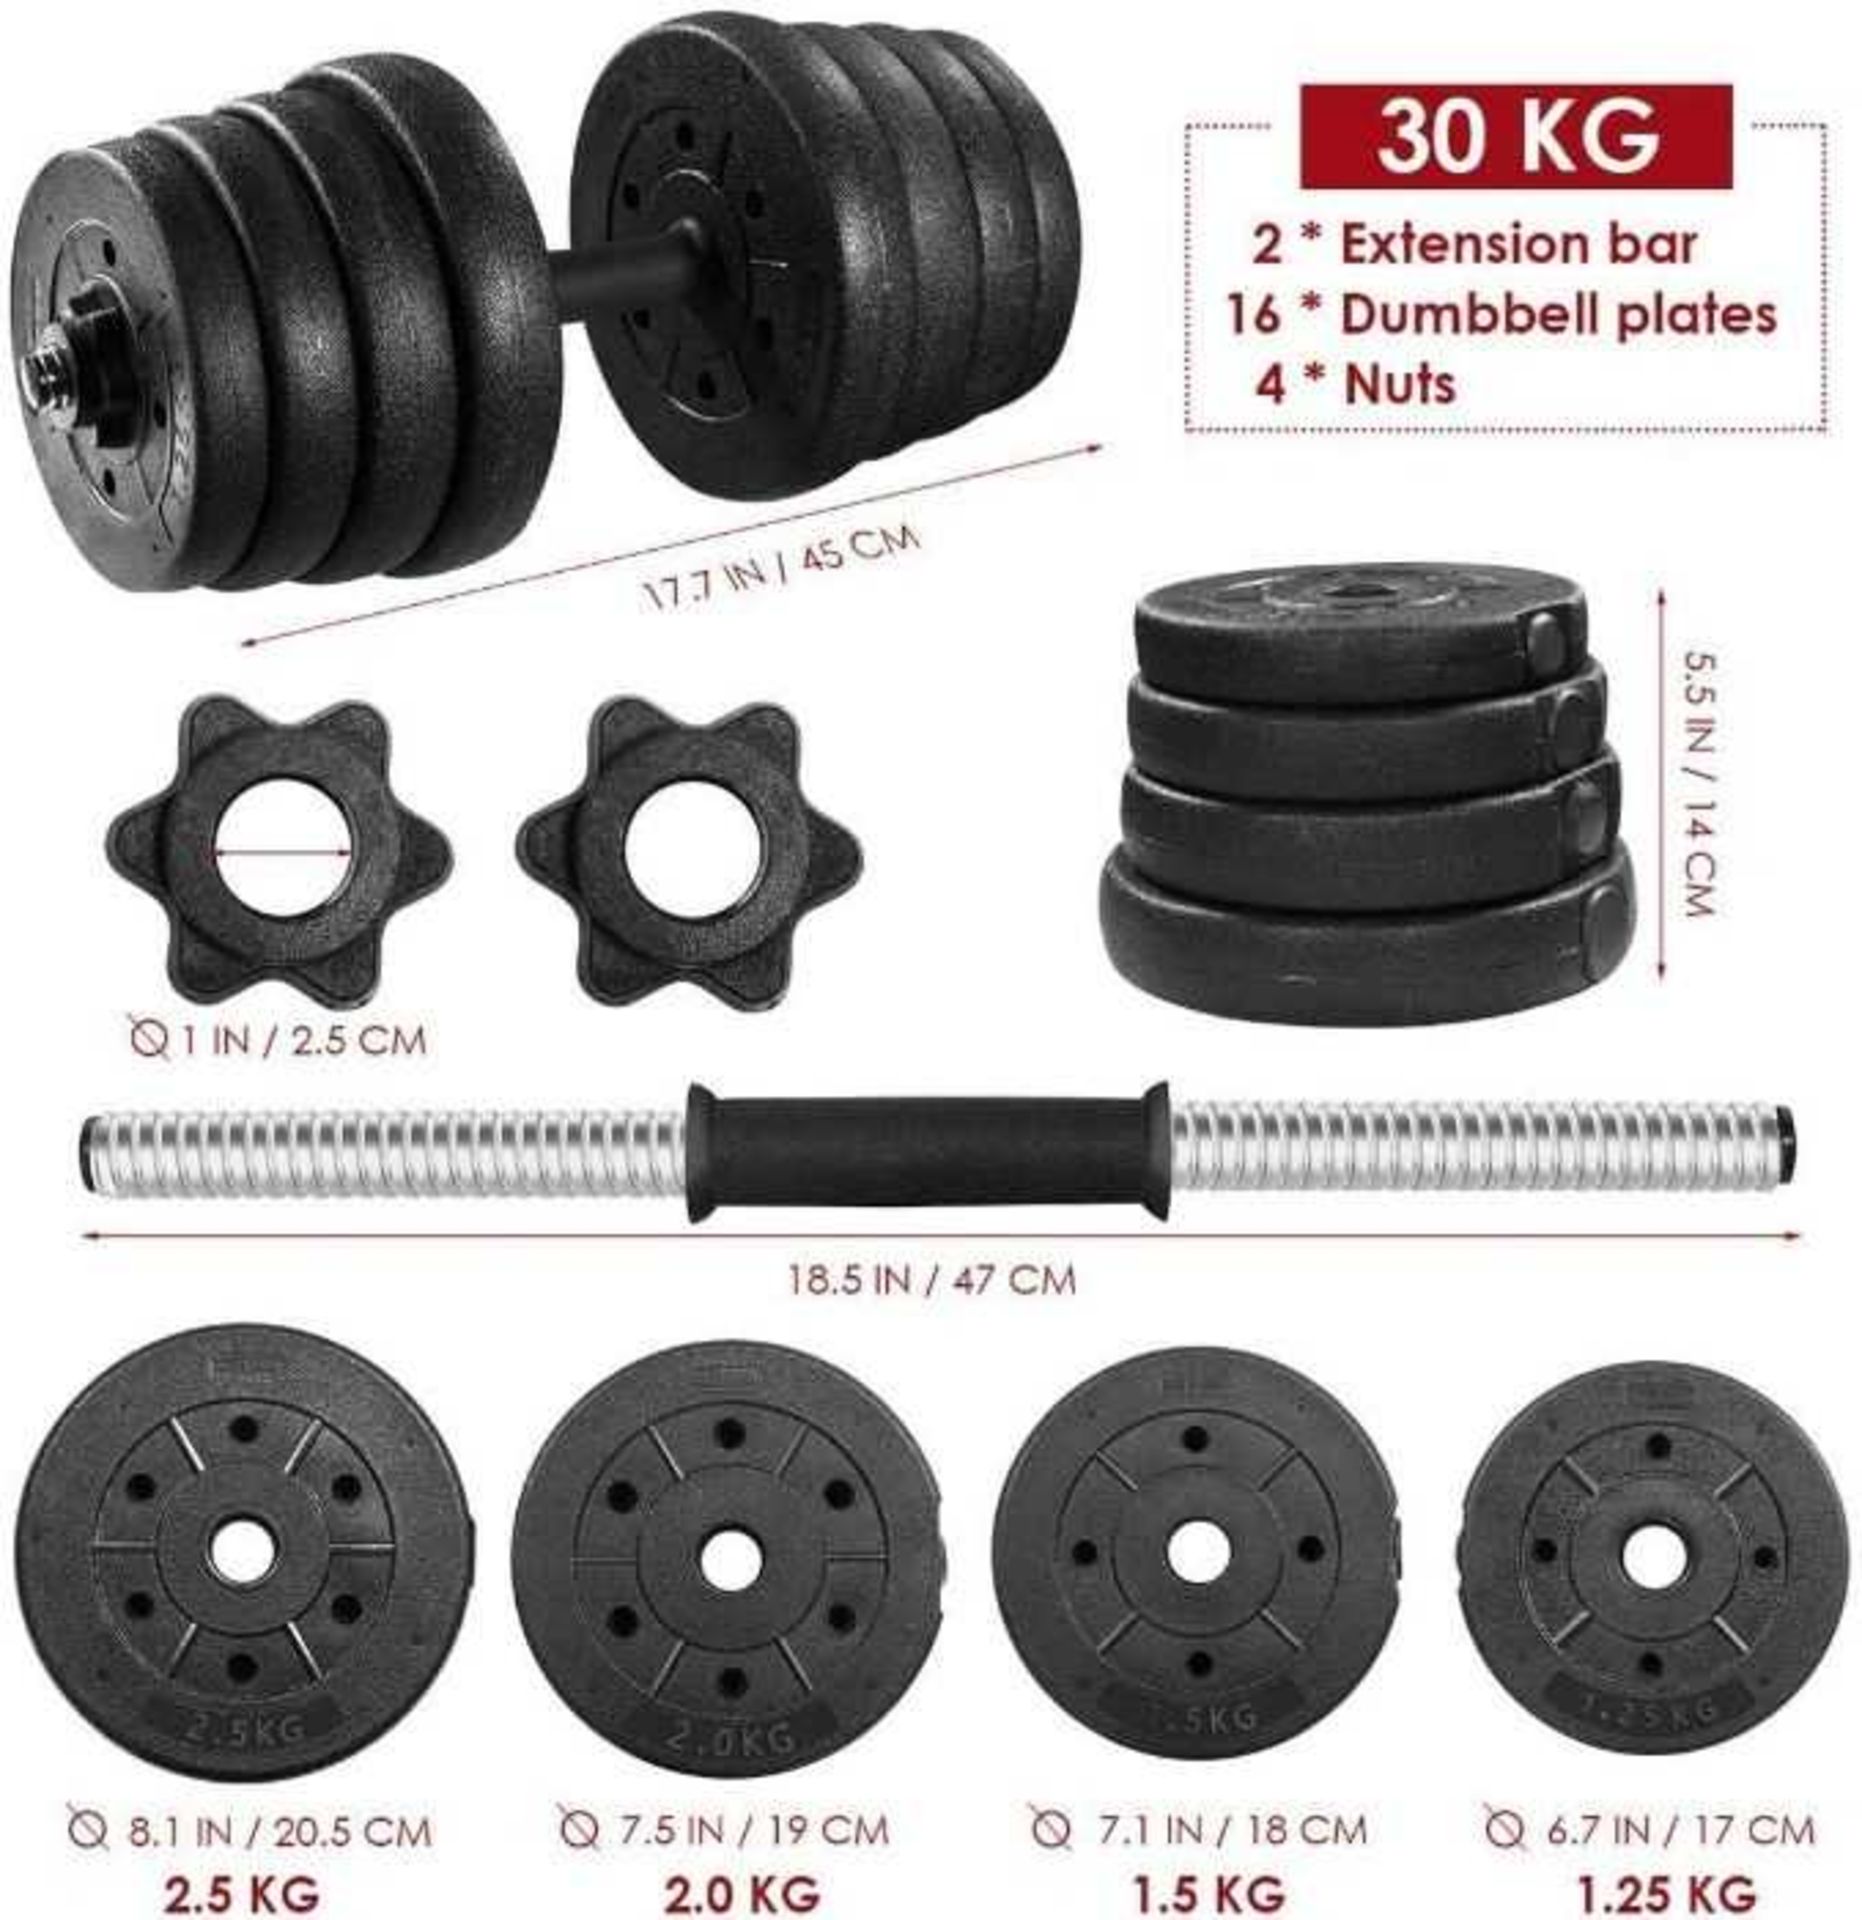 VAT 1x Movtotop 30KG adjustable Dumb Bell weight set, new and boxed, we can only find these in